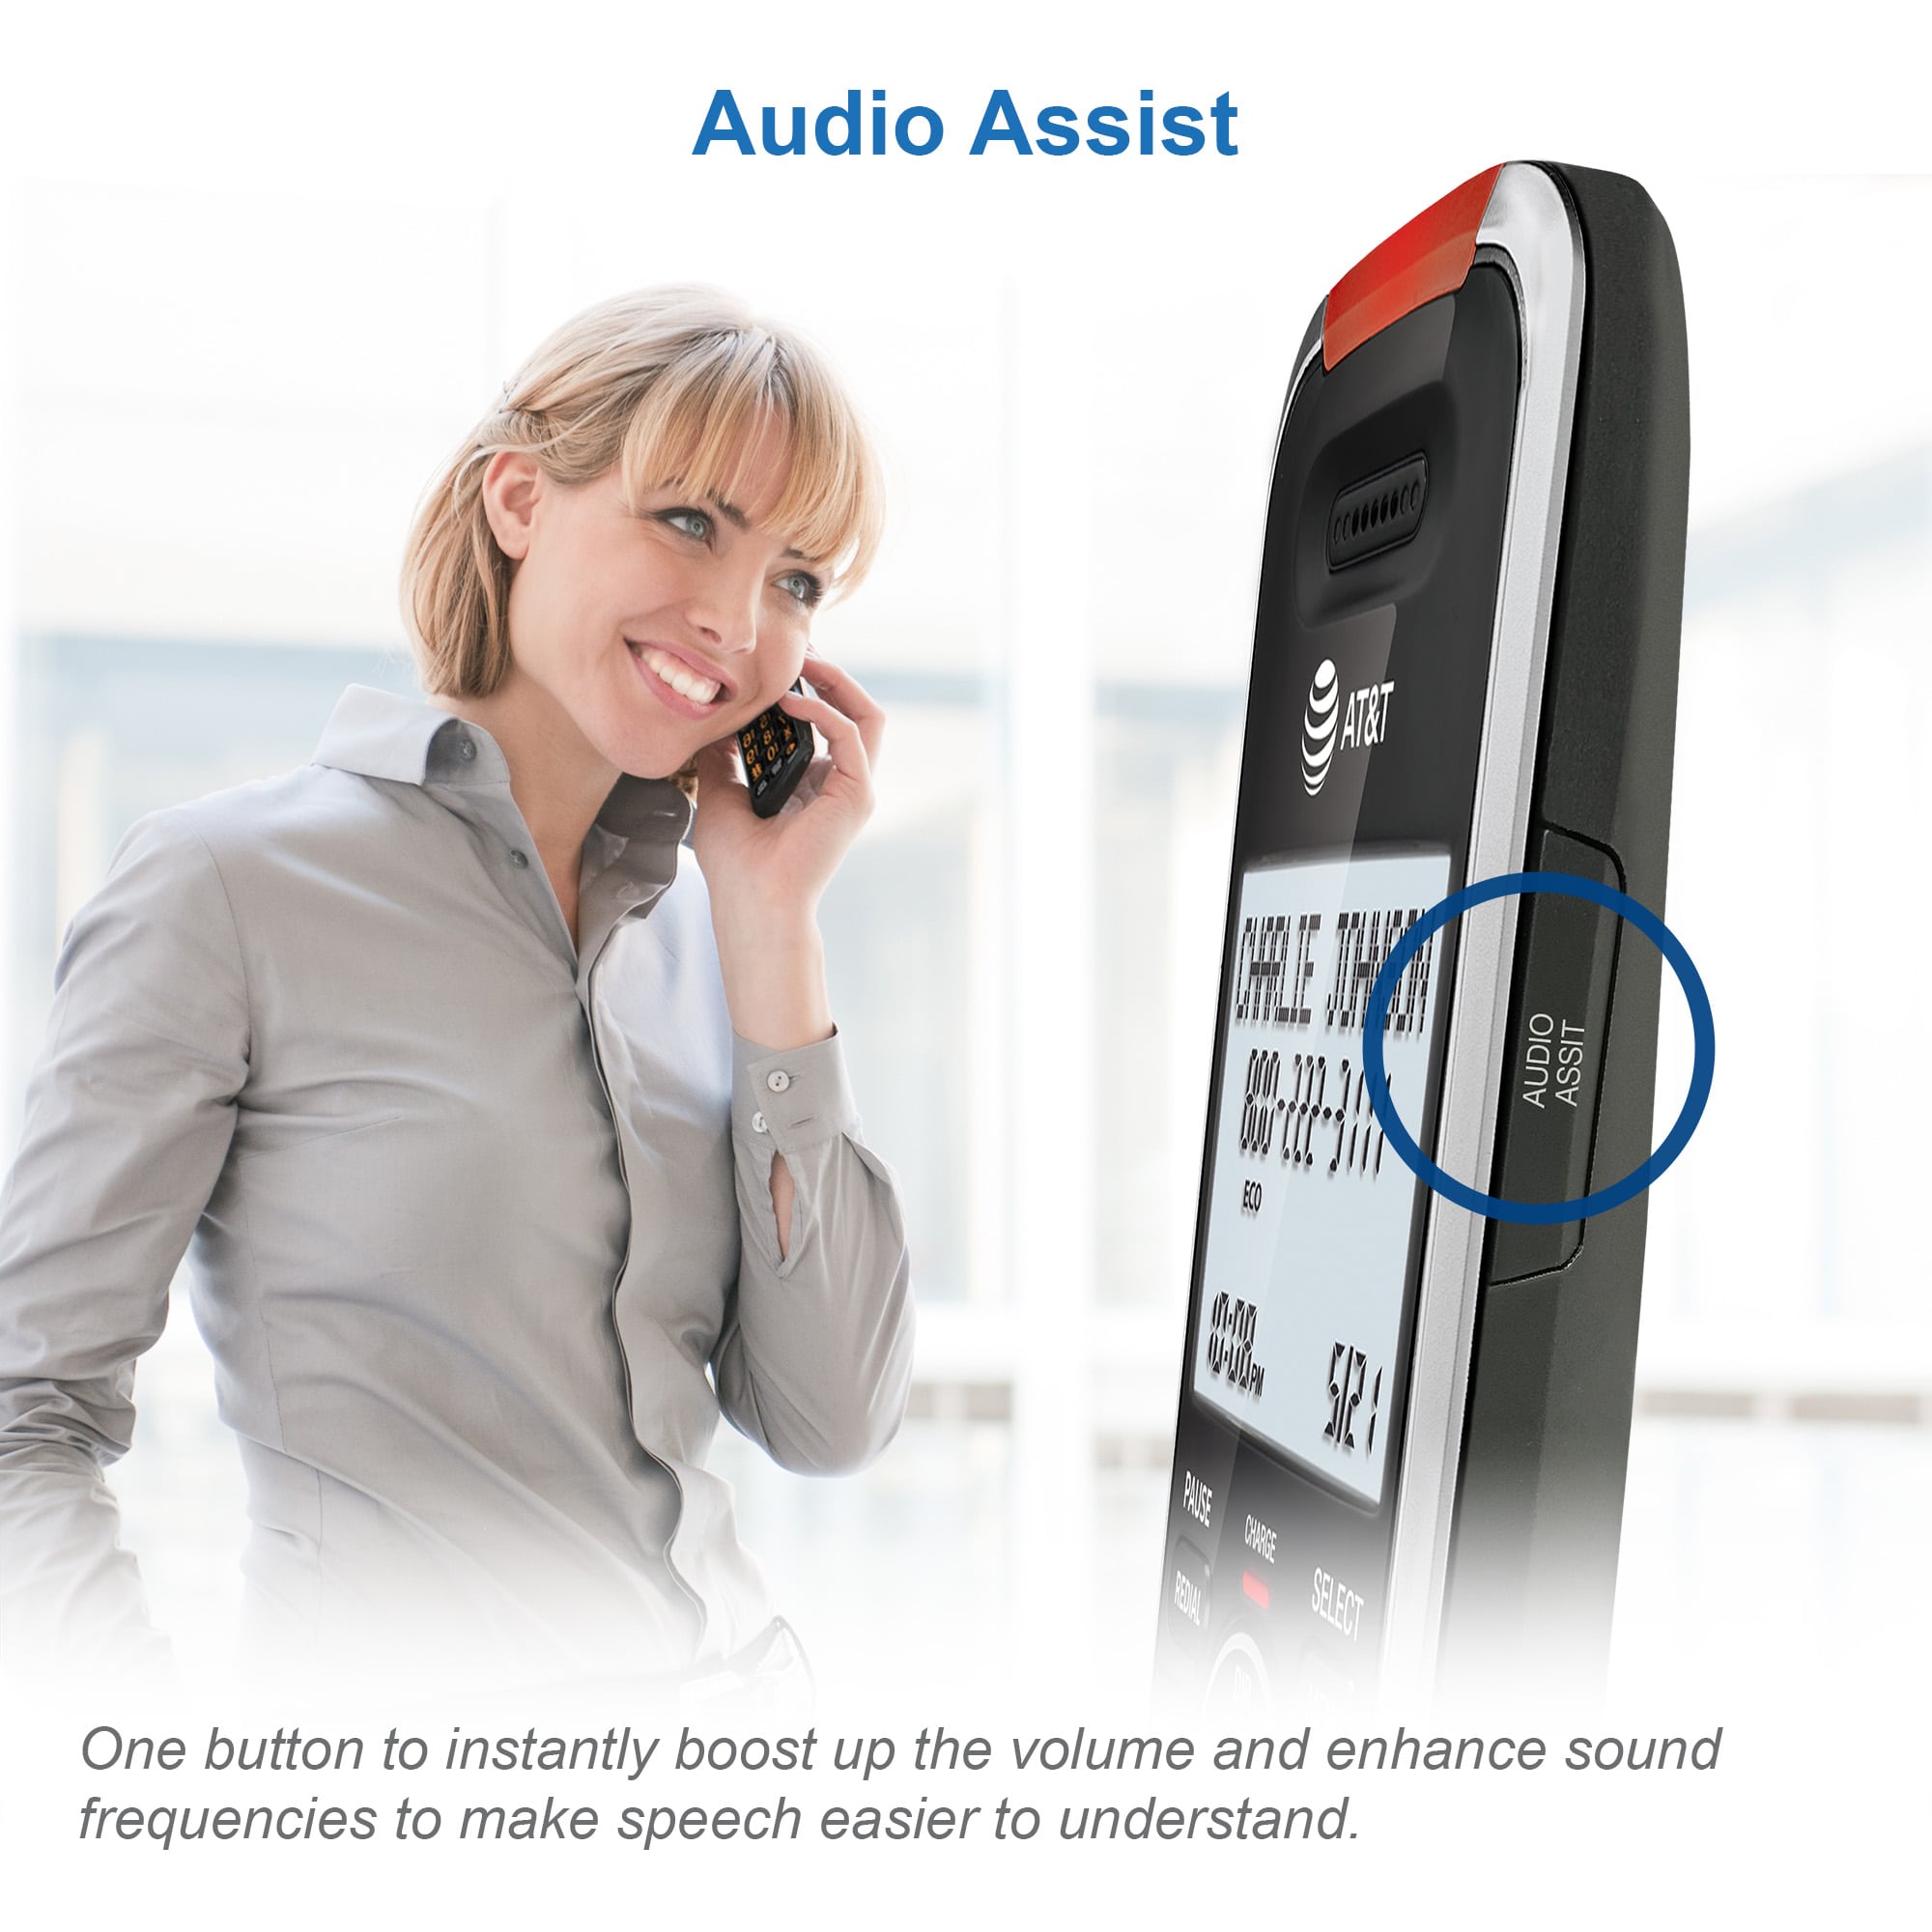 4-Handset Cordless Phone with Unsurpassed Range, Smart Call Blocker and Answering System - view 7